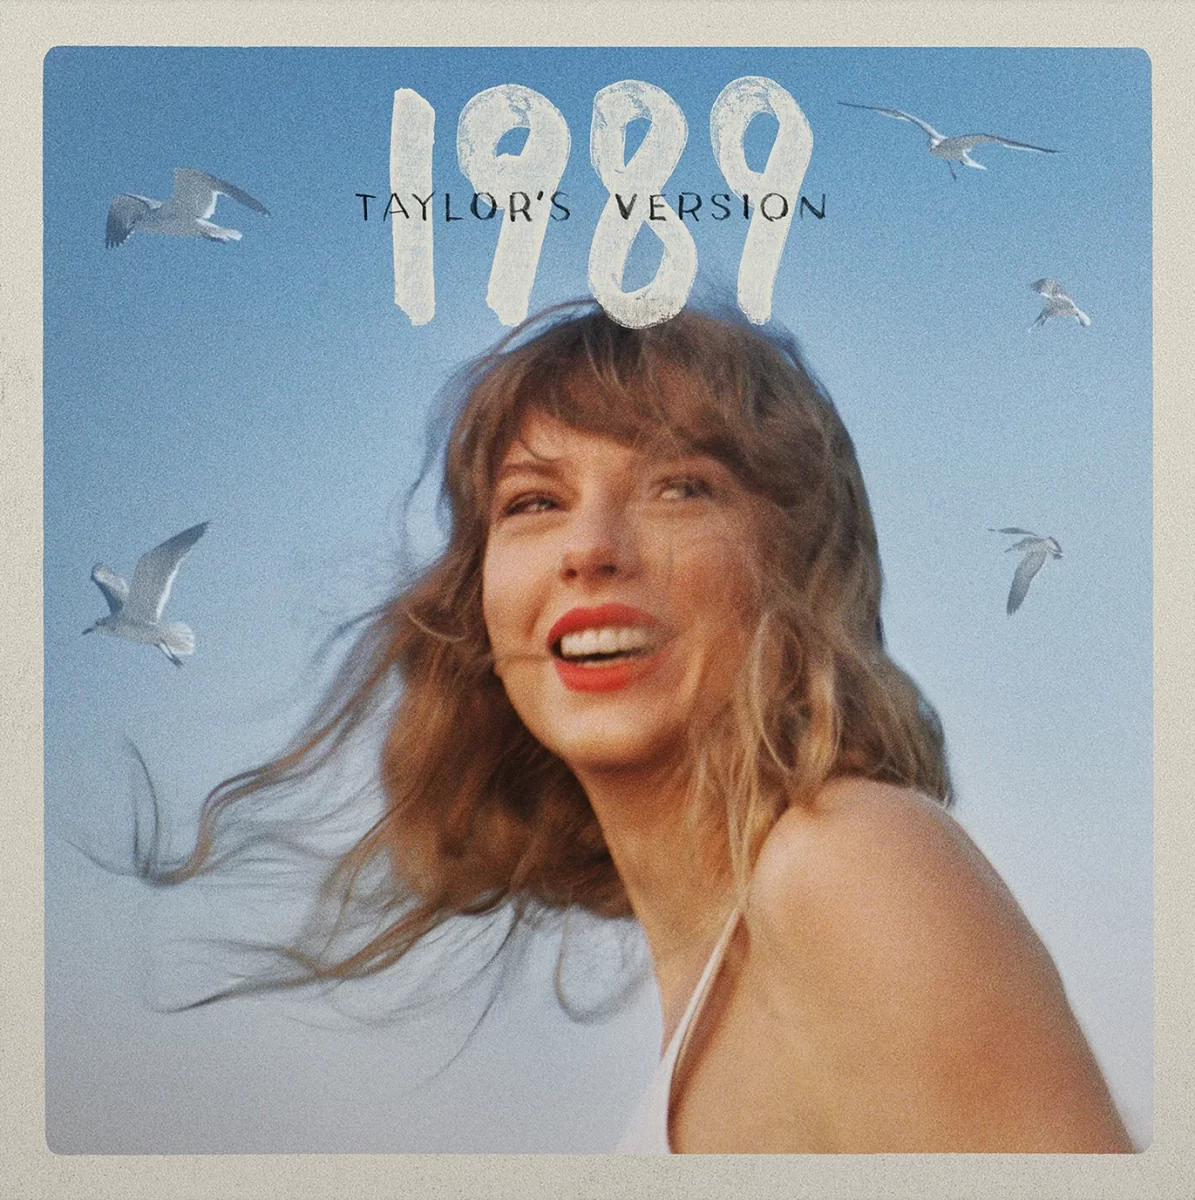 Everything to Know About 1989 (Taylors Version)!